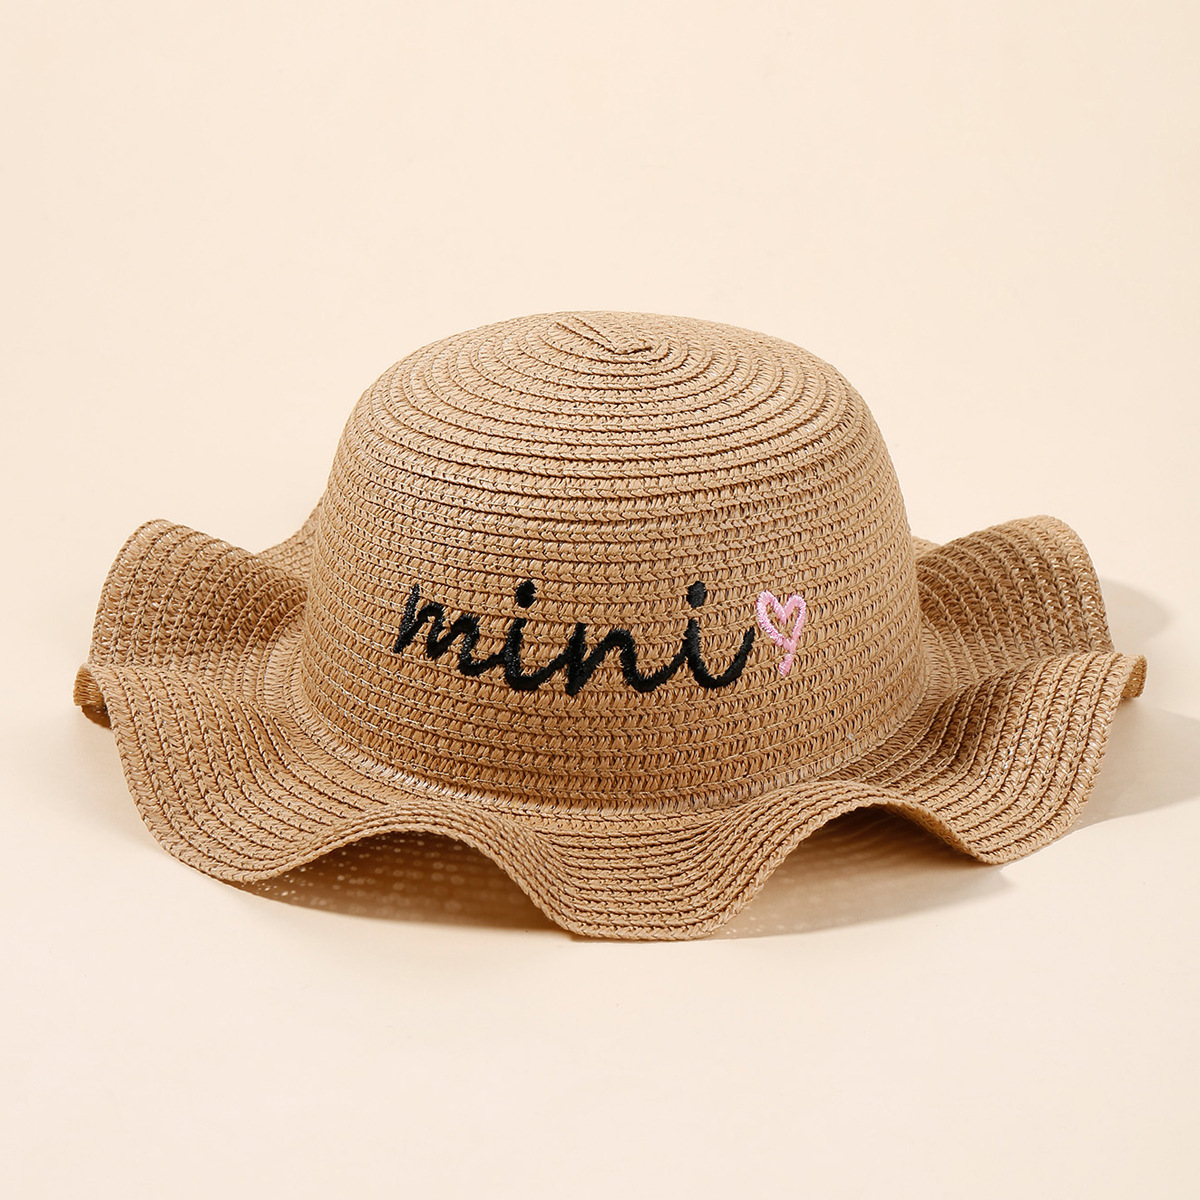 New Simple Spring and Autumn Children's Sun Hat Beach Baby Fisherman Hat Sunshade Breathable Baby Straw Hat